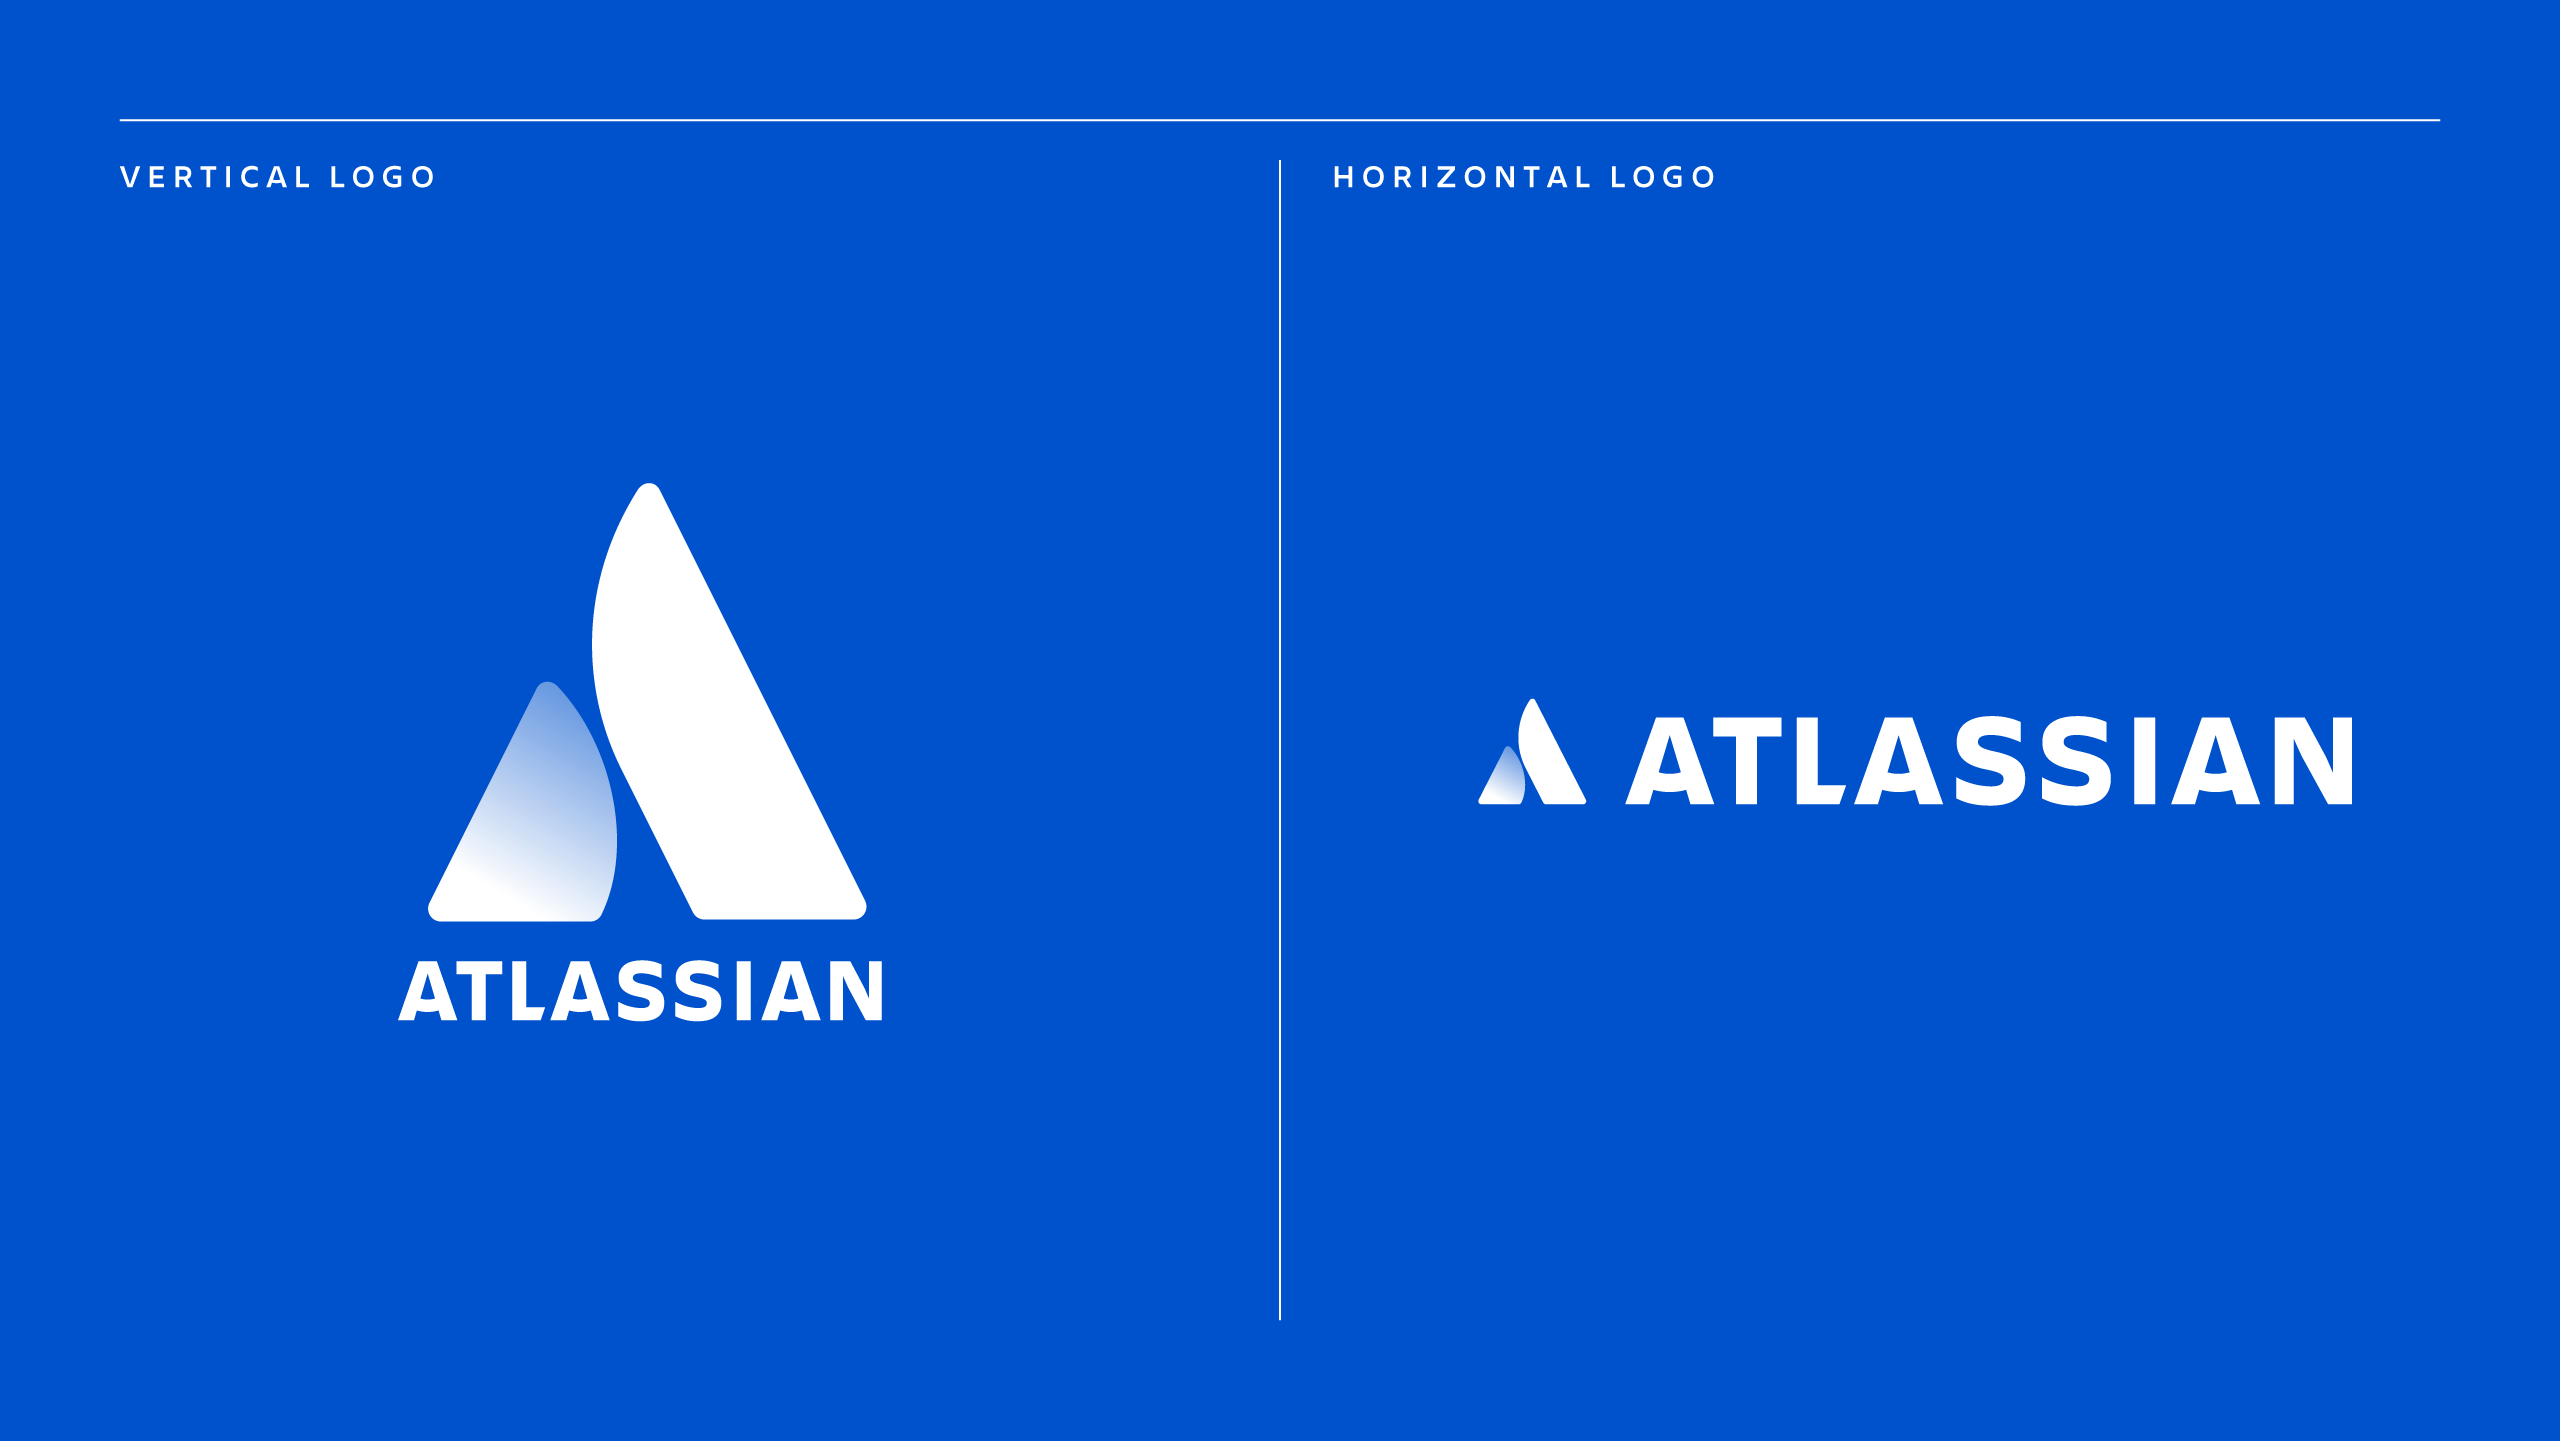 New Azure Logo - Our bold new brand